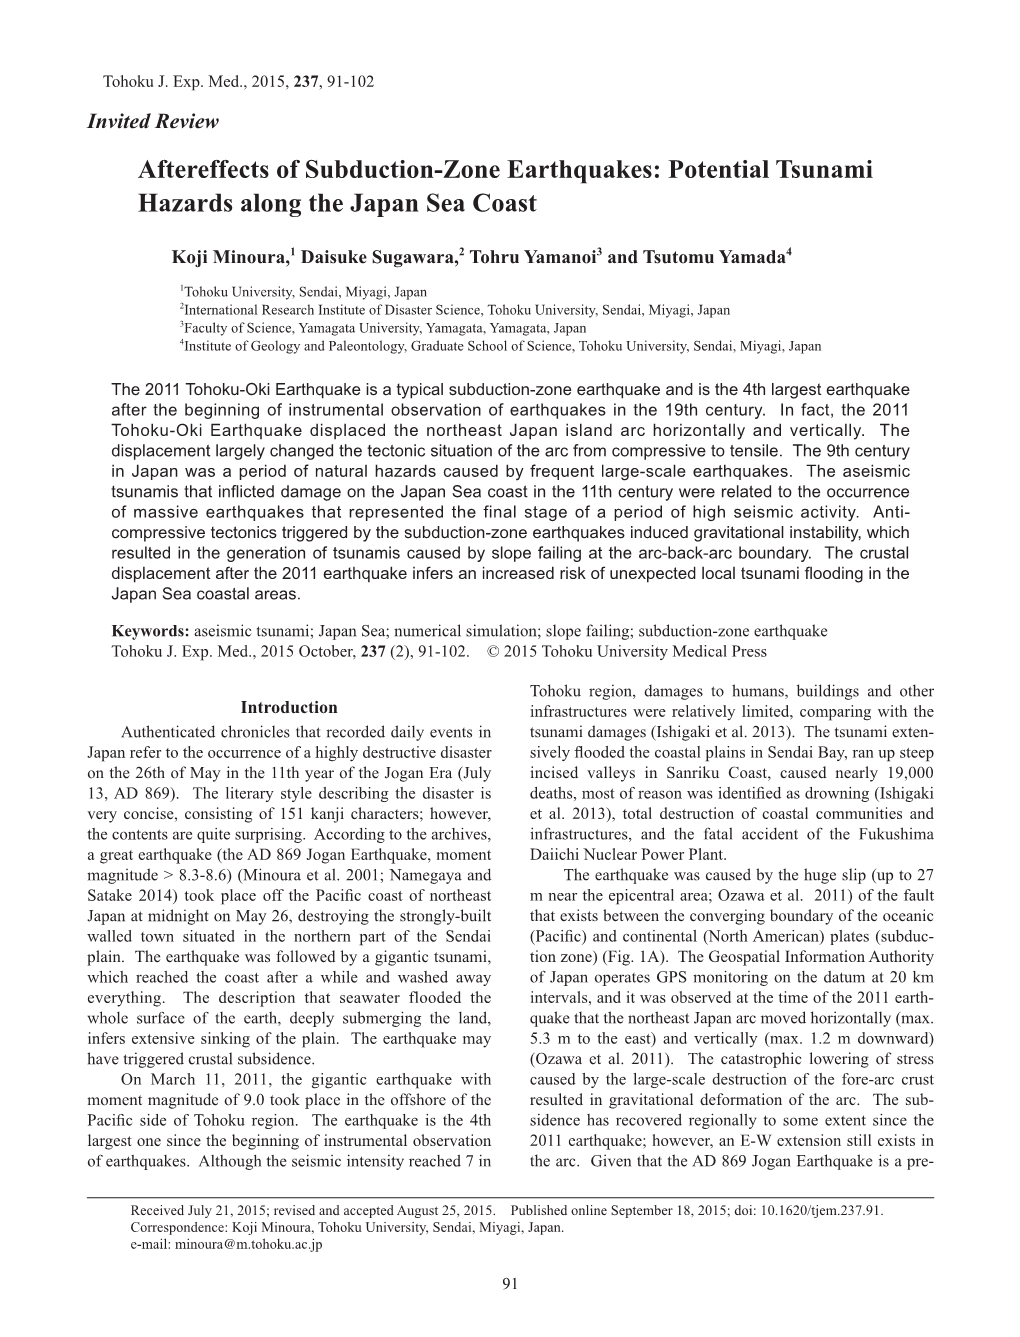 Aftereffects of Subduction-Zone Earthquakes: Potential Tsunami Hazards Along the Japan Sea Coast